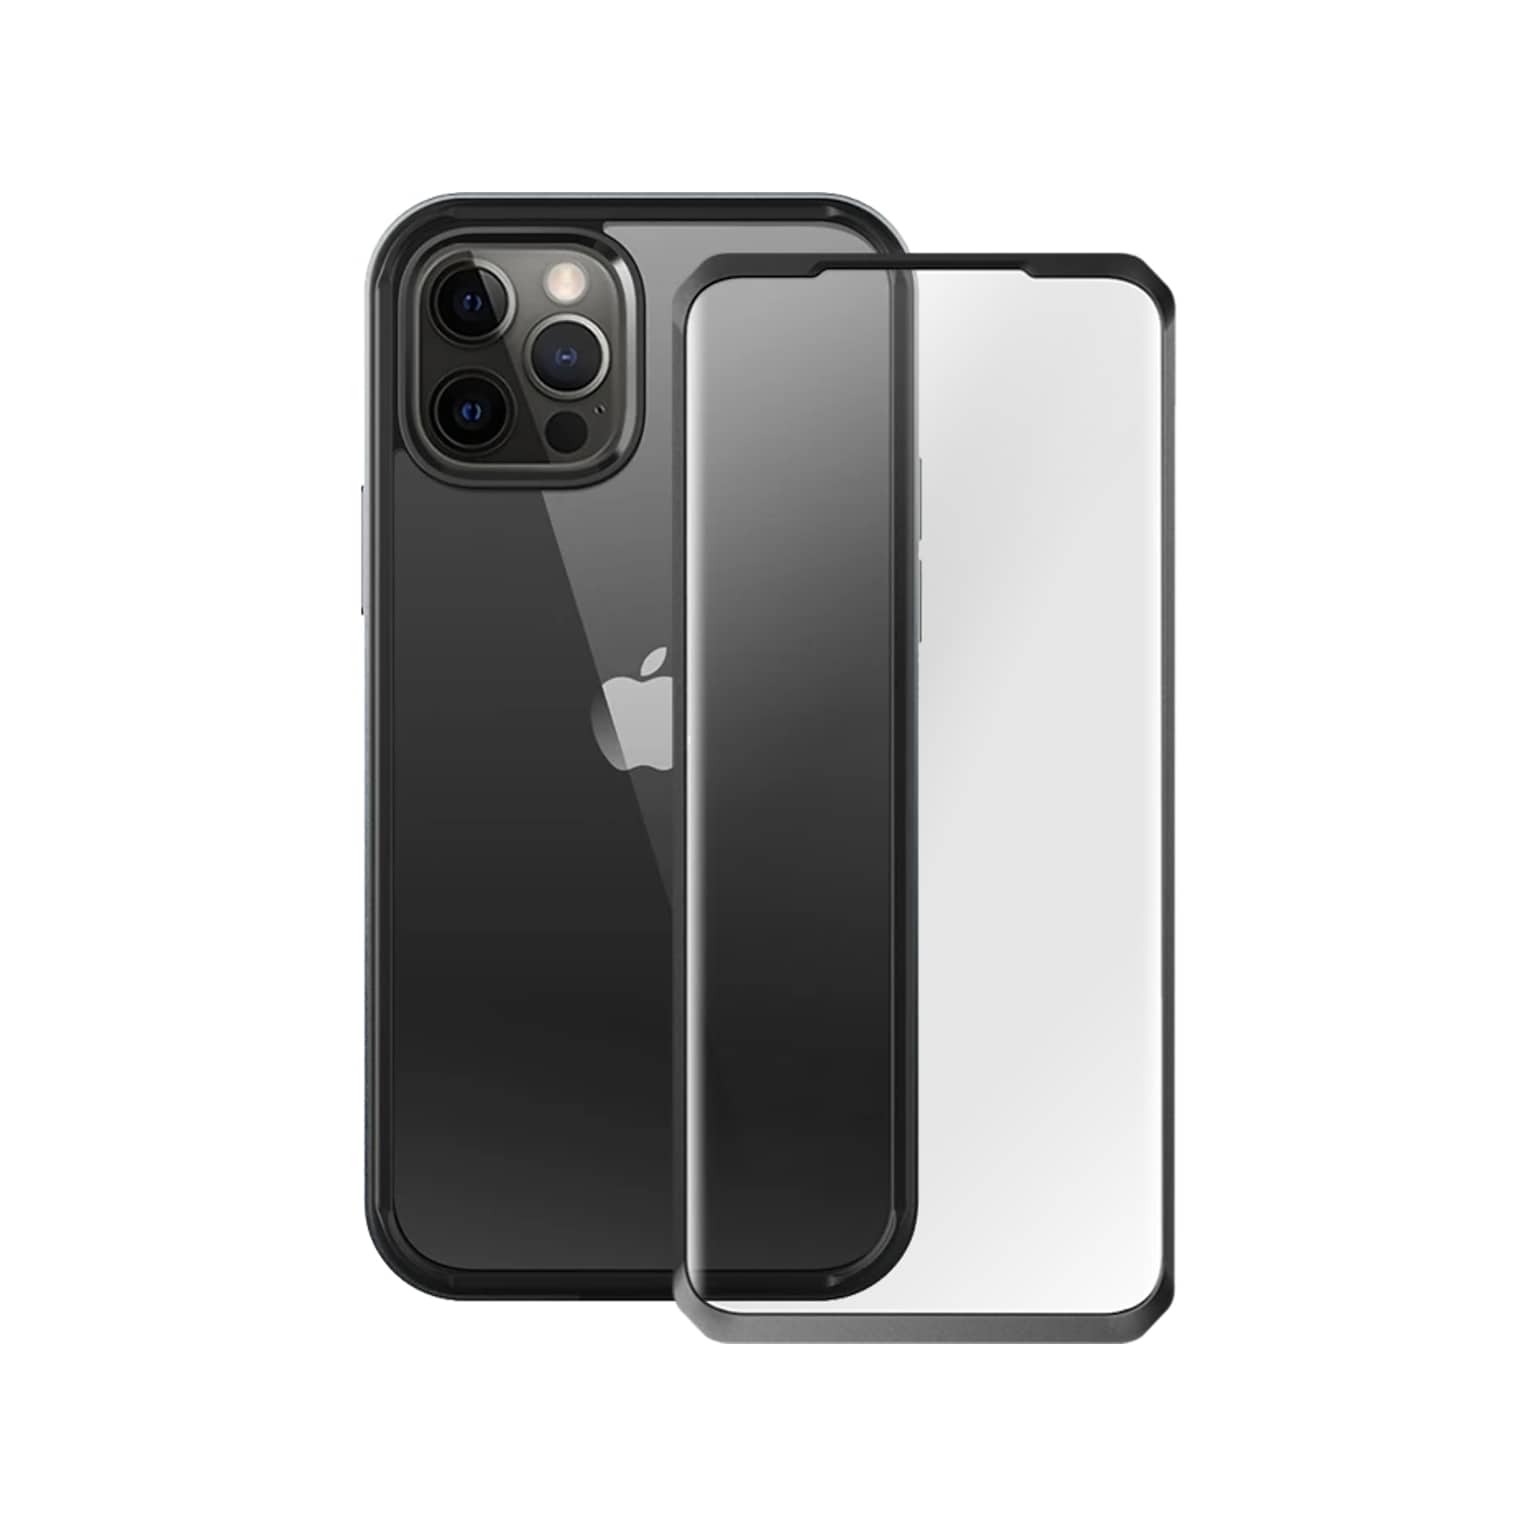 SUPCASE Unicorn Beetle Black Edge with Screen Protector Case for iPhone 13 Pro Max (SUP-iPhone2021-6.7-EdgePro-SP-Black)